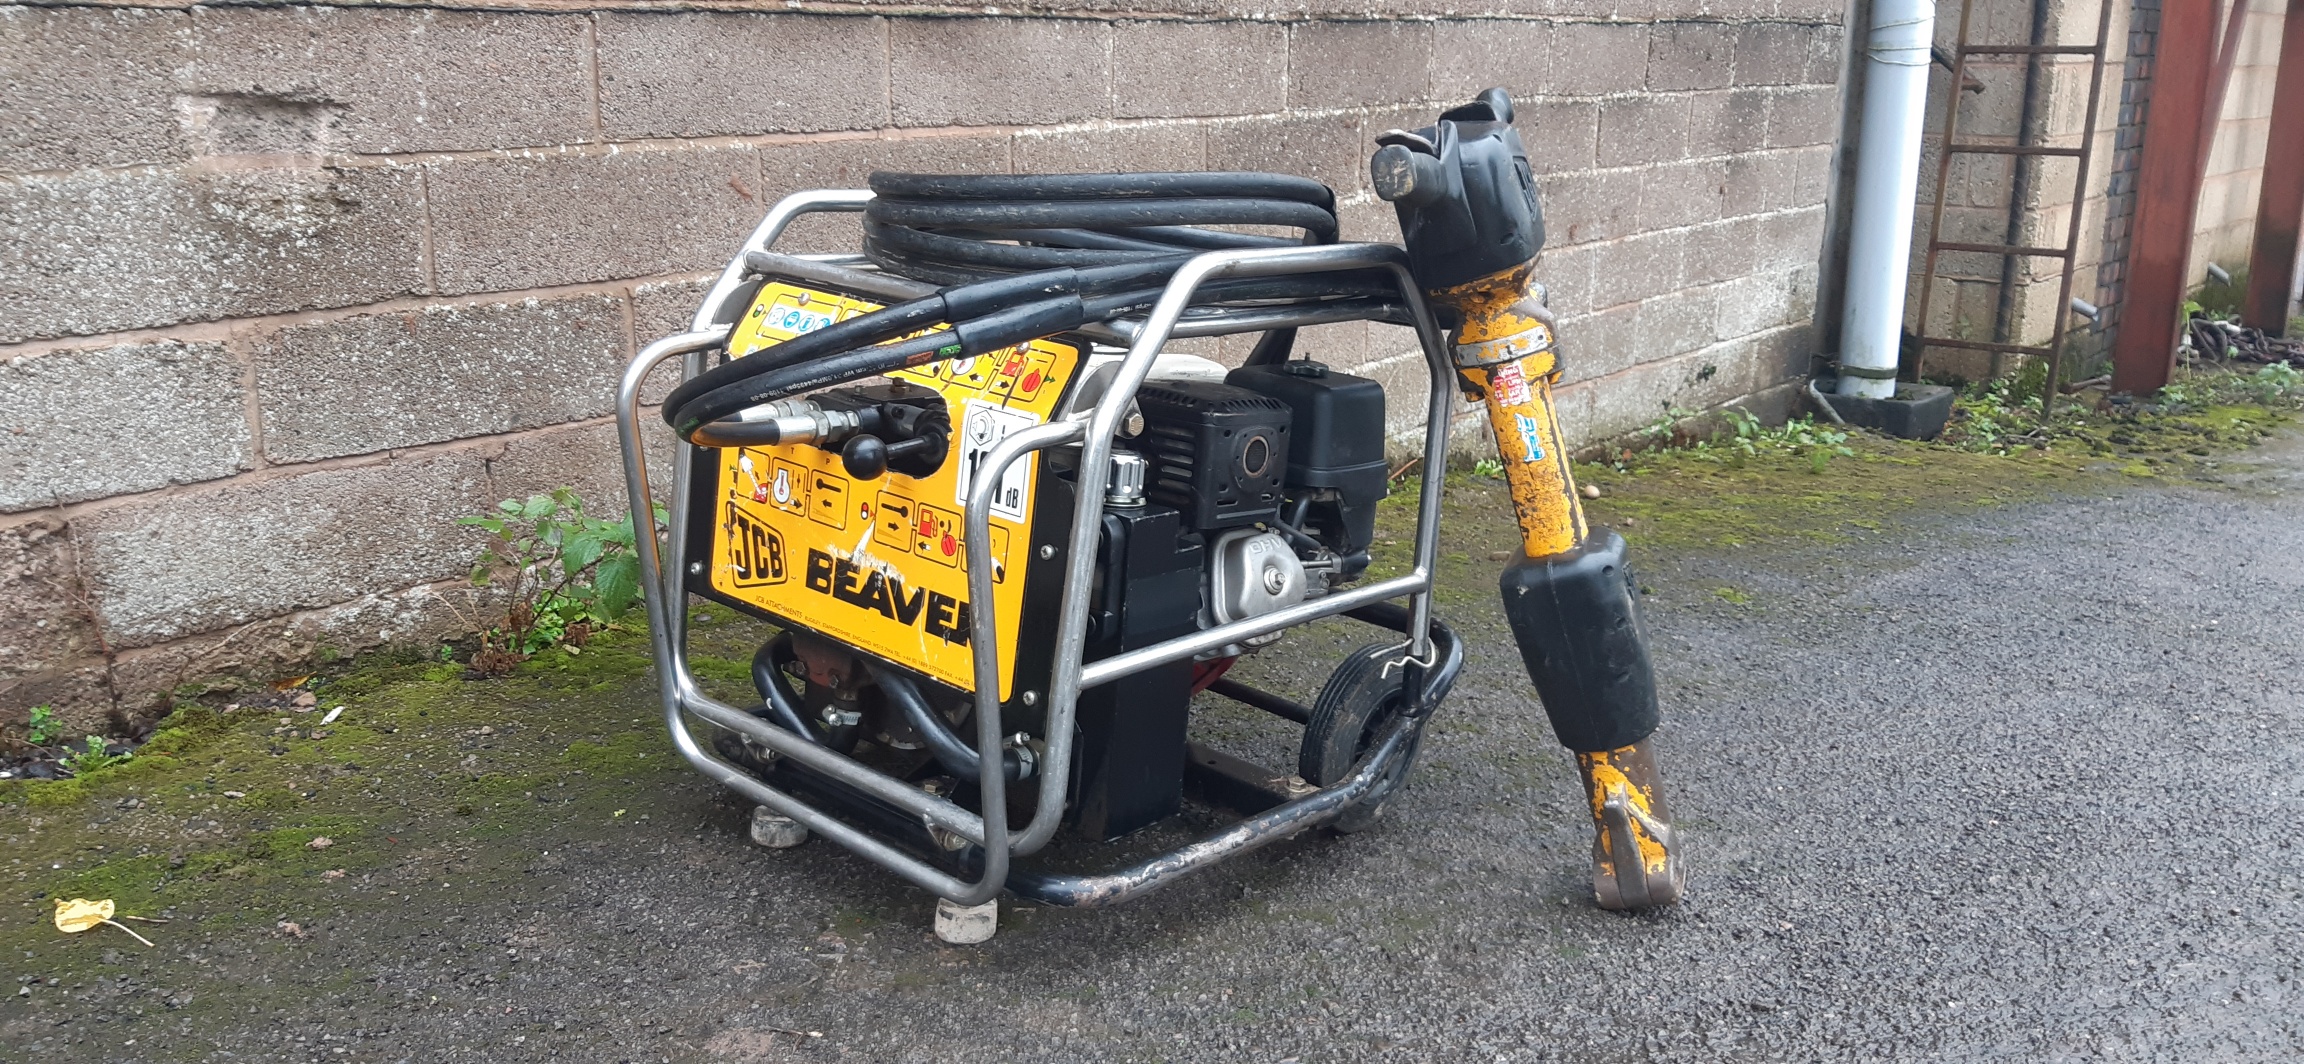 Read more about the article JCB Beaverpack C/W Breaker – Choice